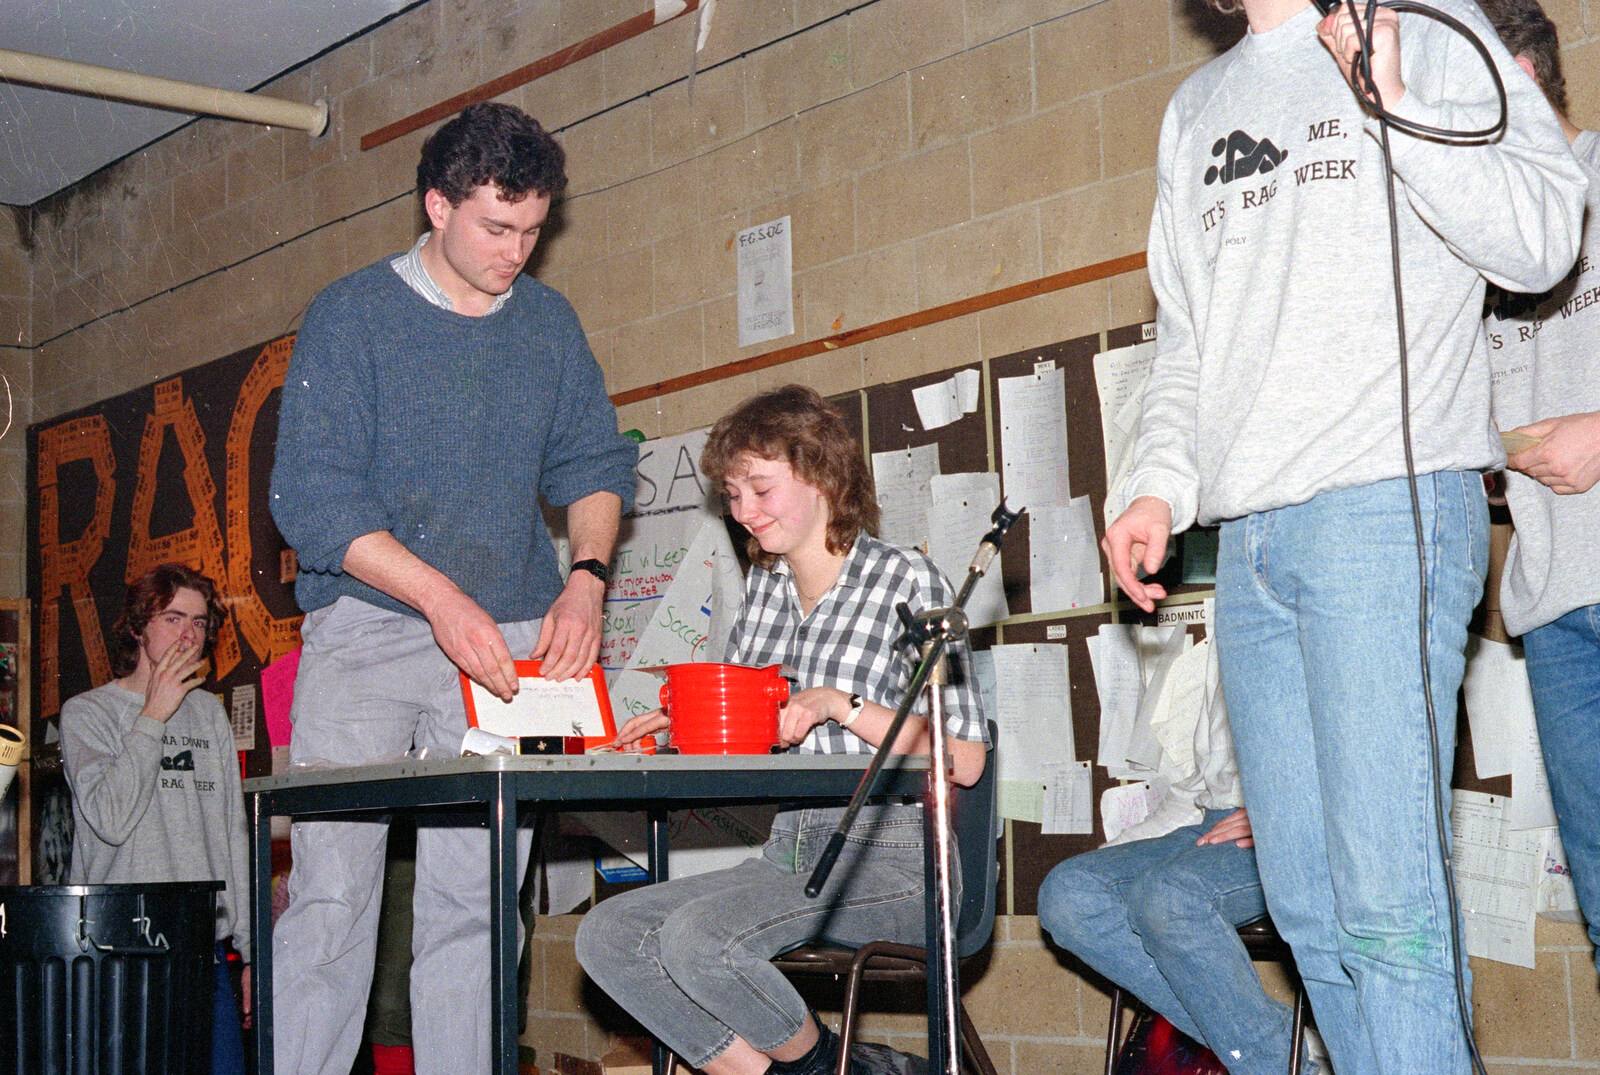 Martin and Alison do the raffle from Uni: The PPSU "Jazz" RAG Review and Charity Auction, Plymouth, Devon - 19th February 1986